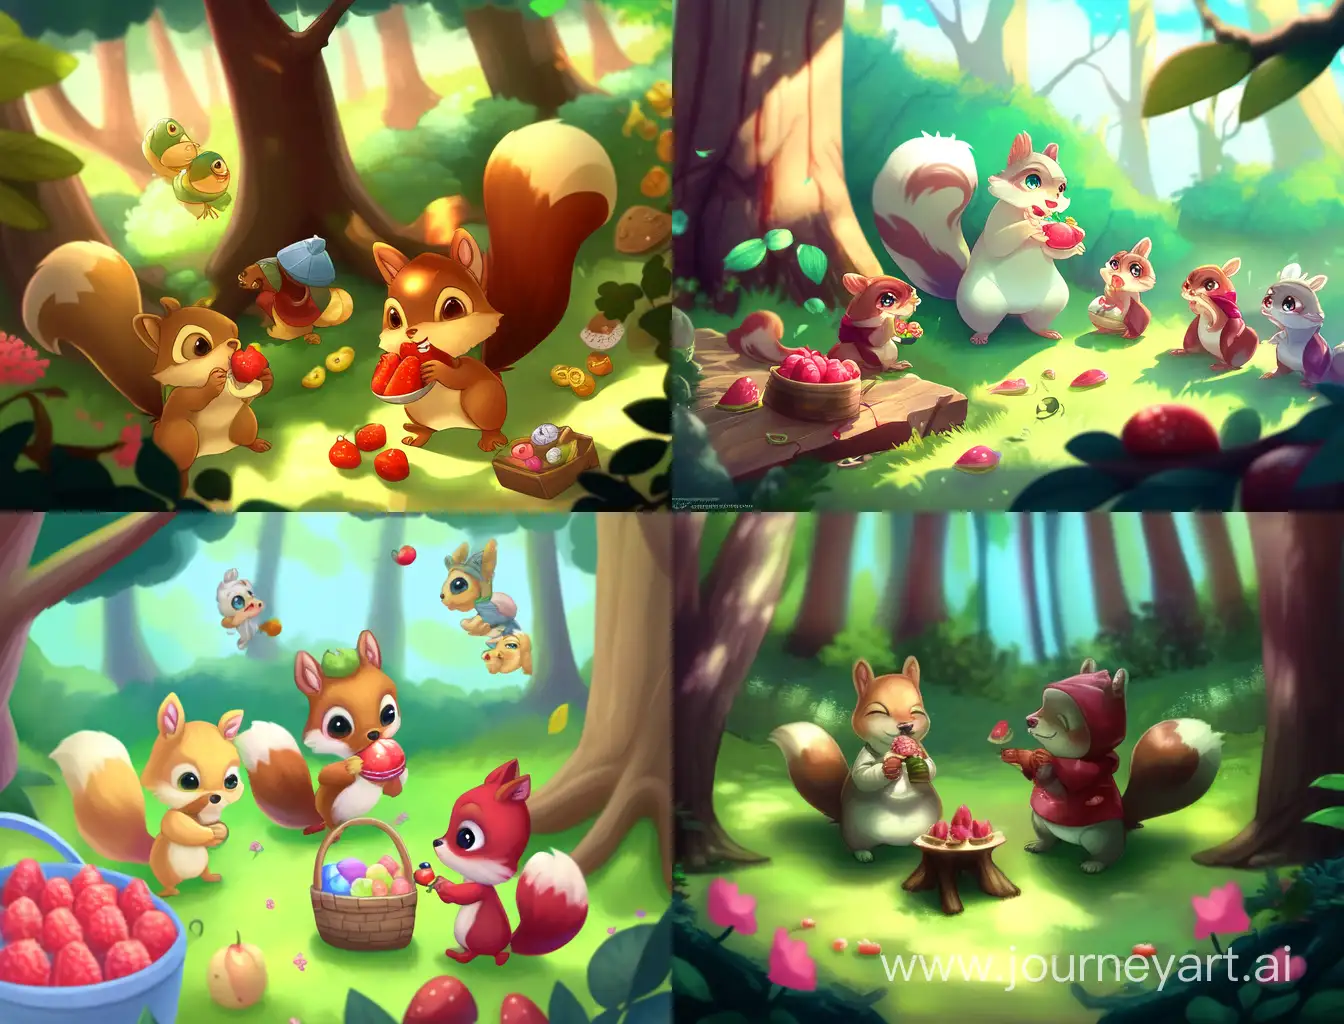 Cartoon squirrels picking strawberries in the forest